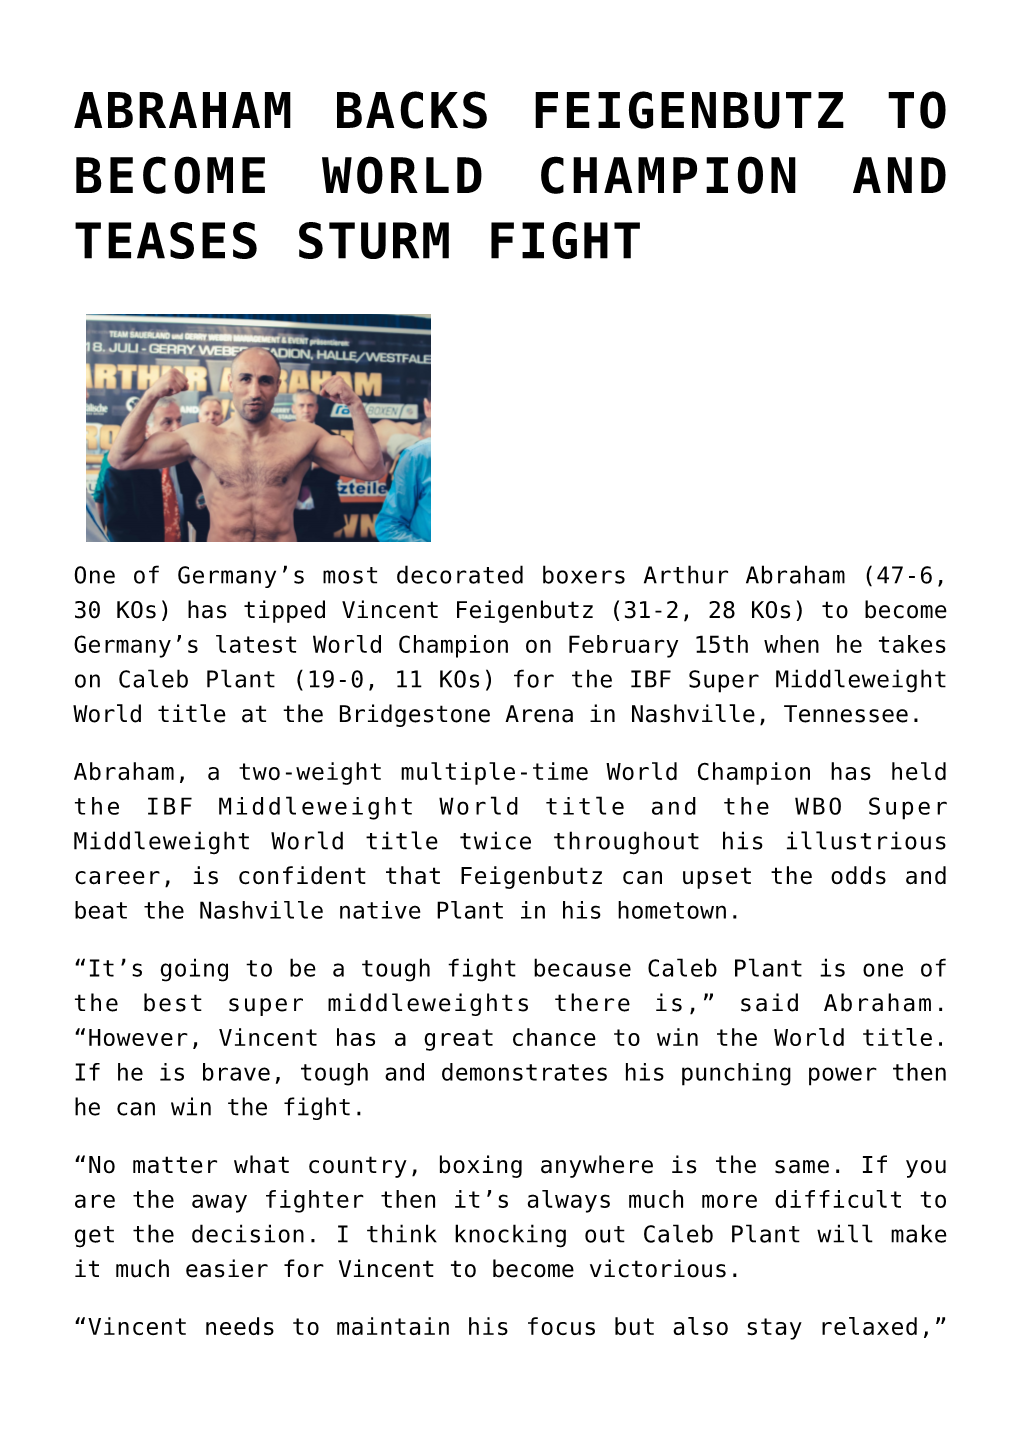 Abraham Backs Feigenbutz to Become World Champion and Teases Sturm Fight